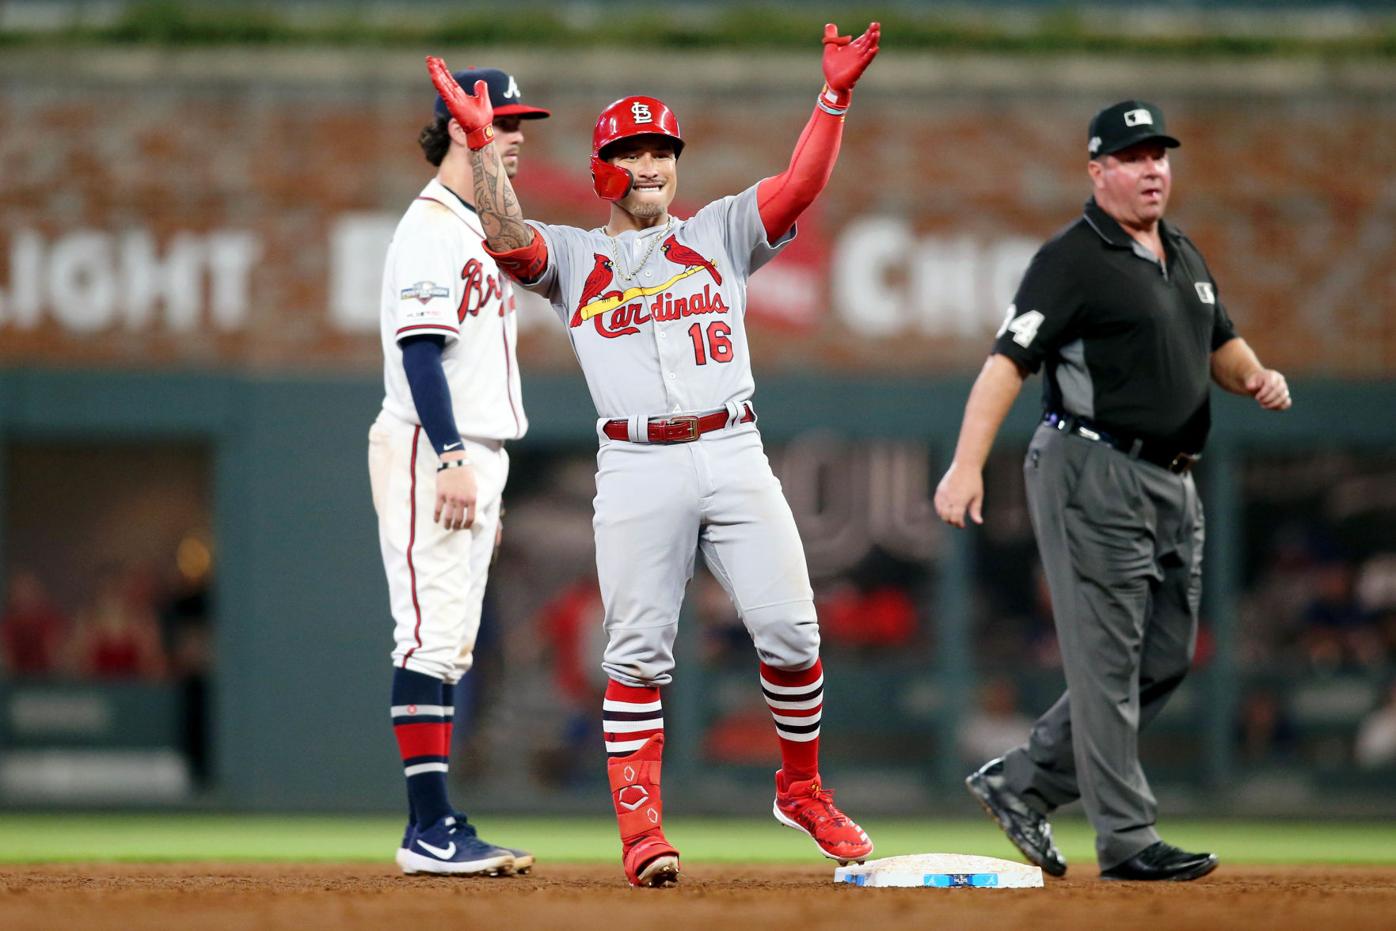 The Seattle Mariners Acquire Kolten Wong For Jesse Winker and Abraham Toro!  